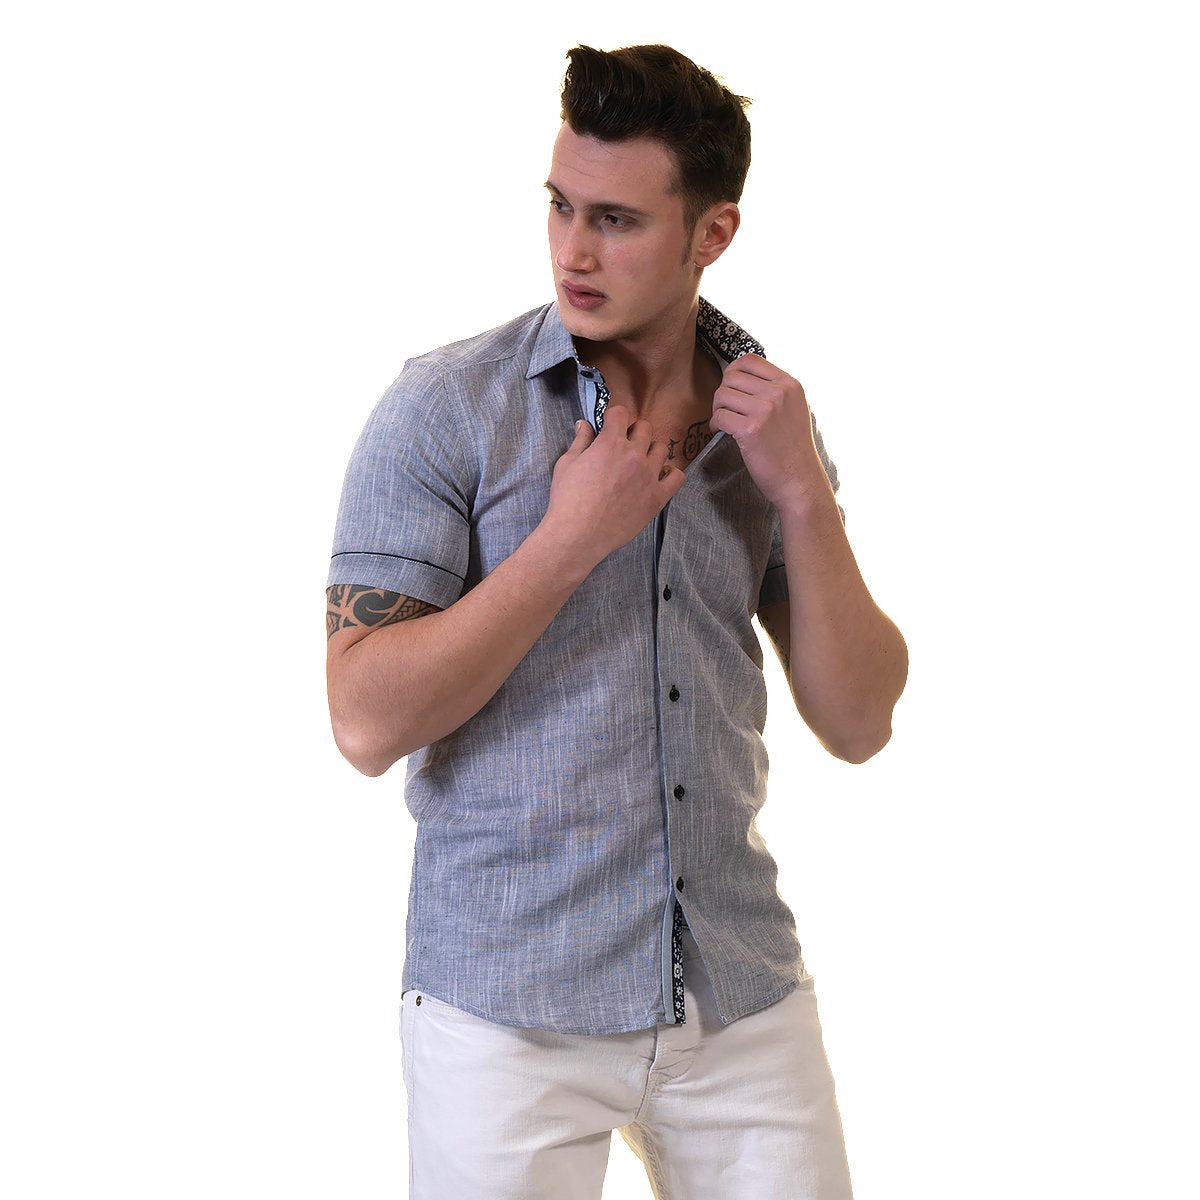 Picture of a Premium Men's Short Sleeve Button Up Shirt in Dark Grey front view